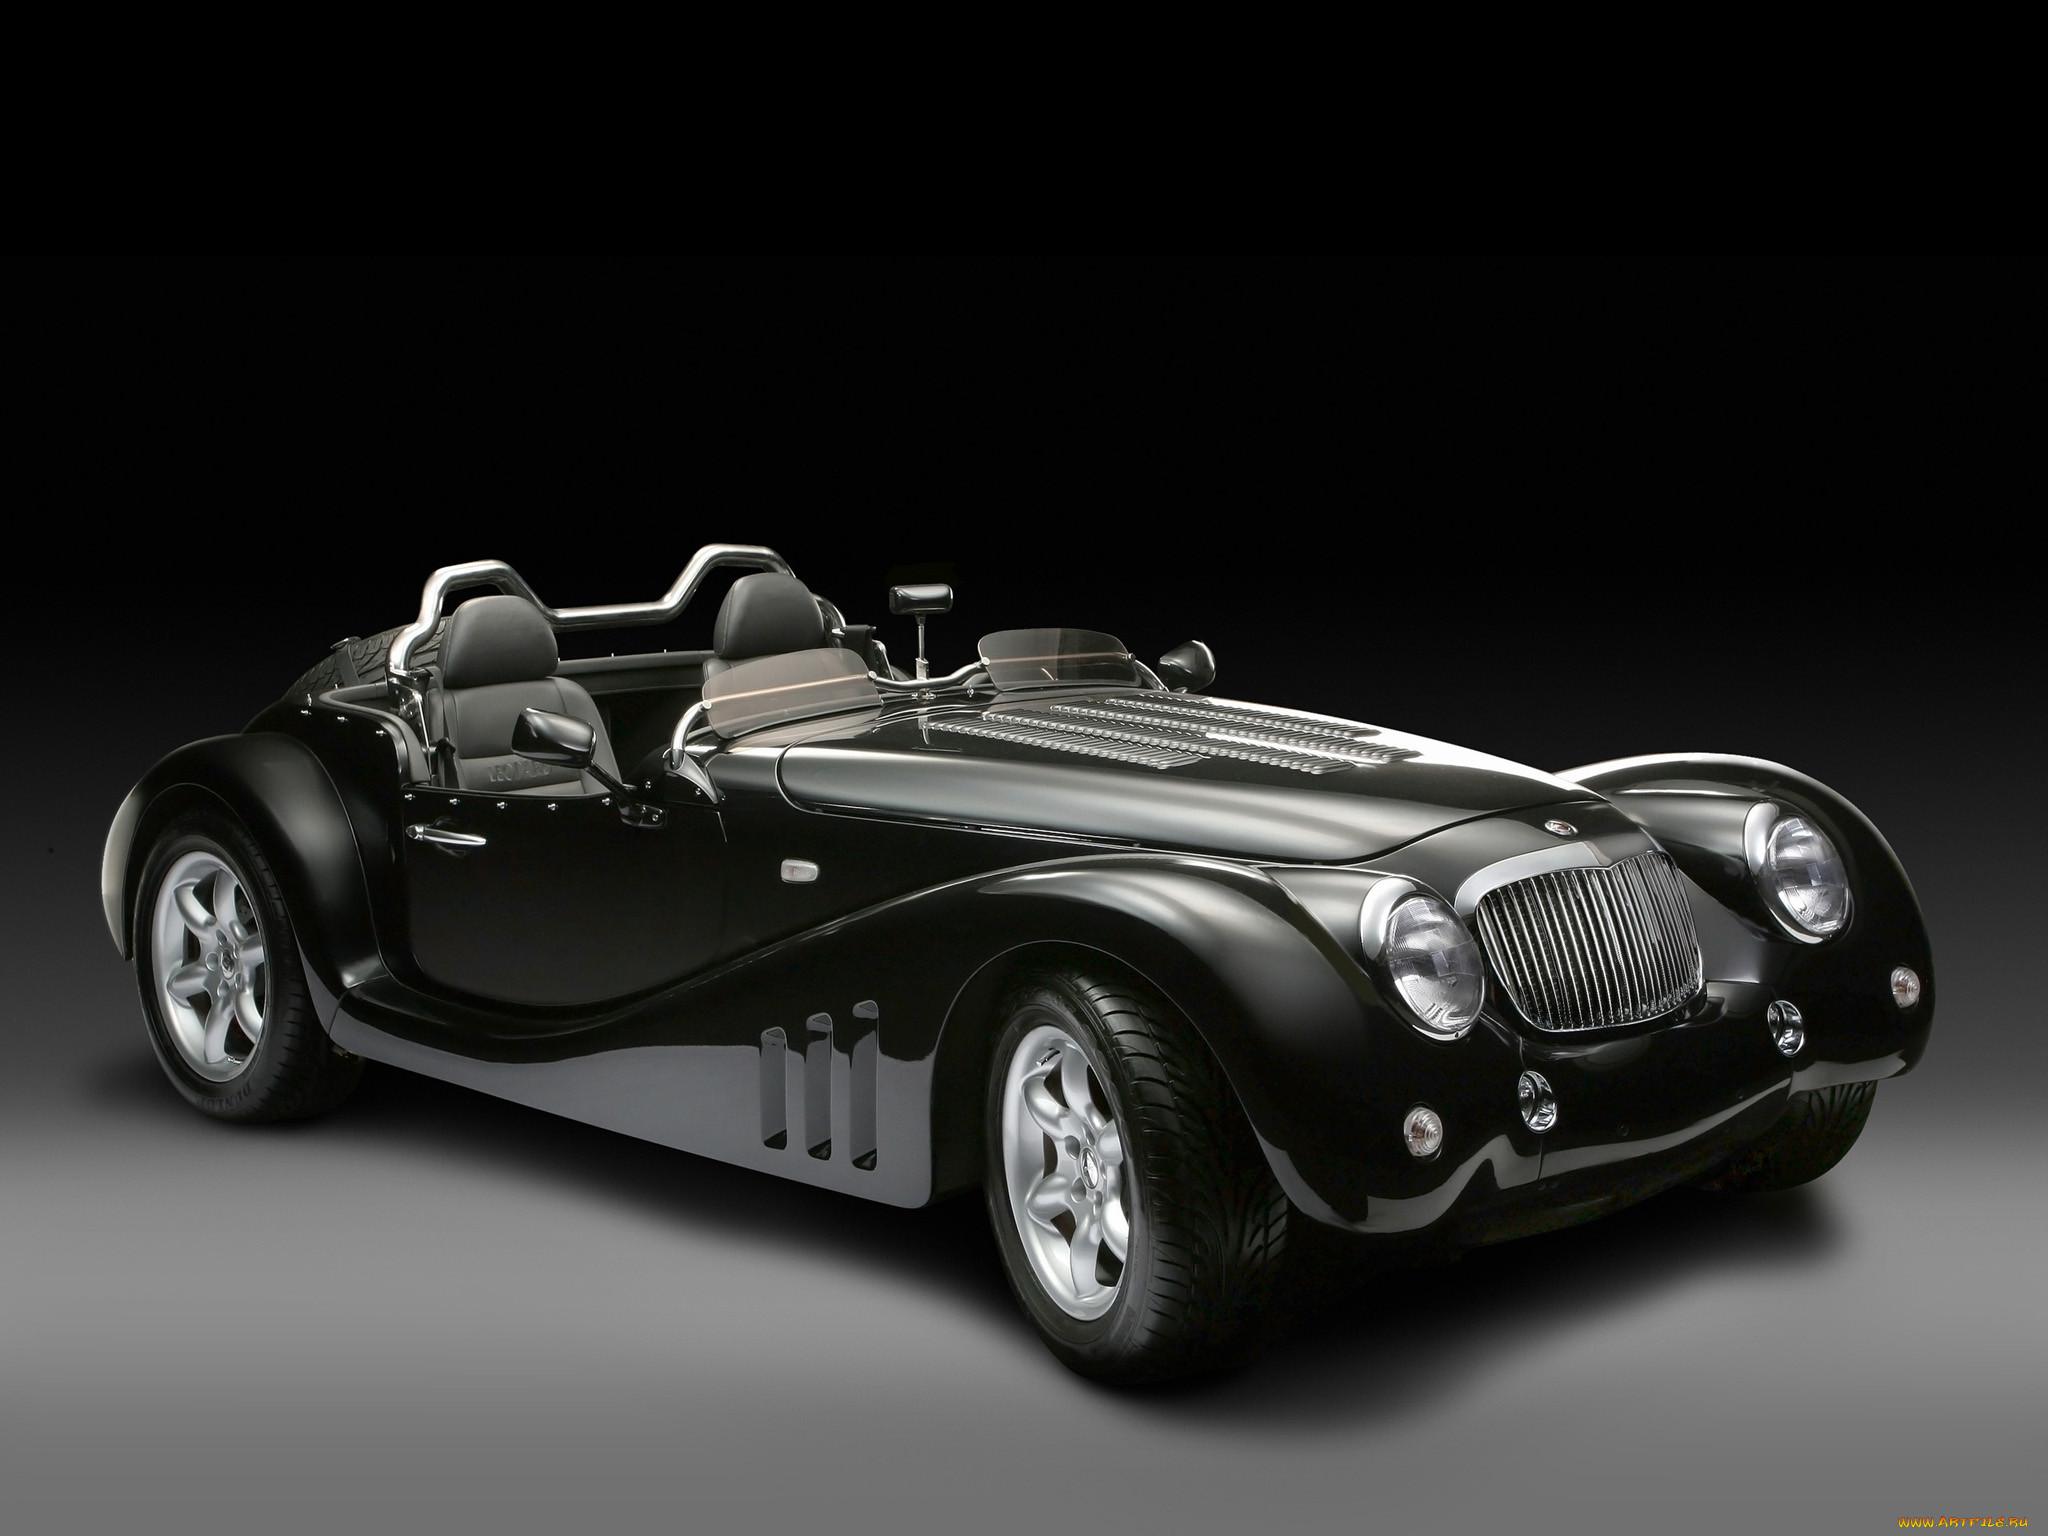 Wit машина. Leopard 6 litre Roadster. Леопард родстер. Buick родстер 2024. Leopard 6 litre Roadster 2005.